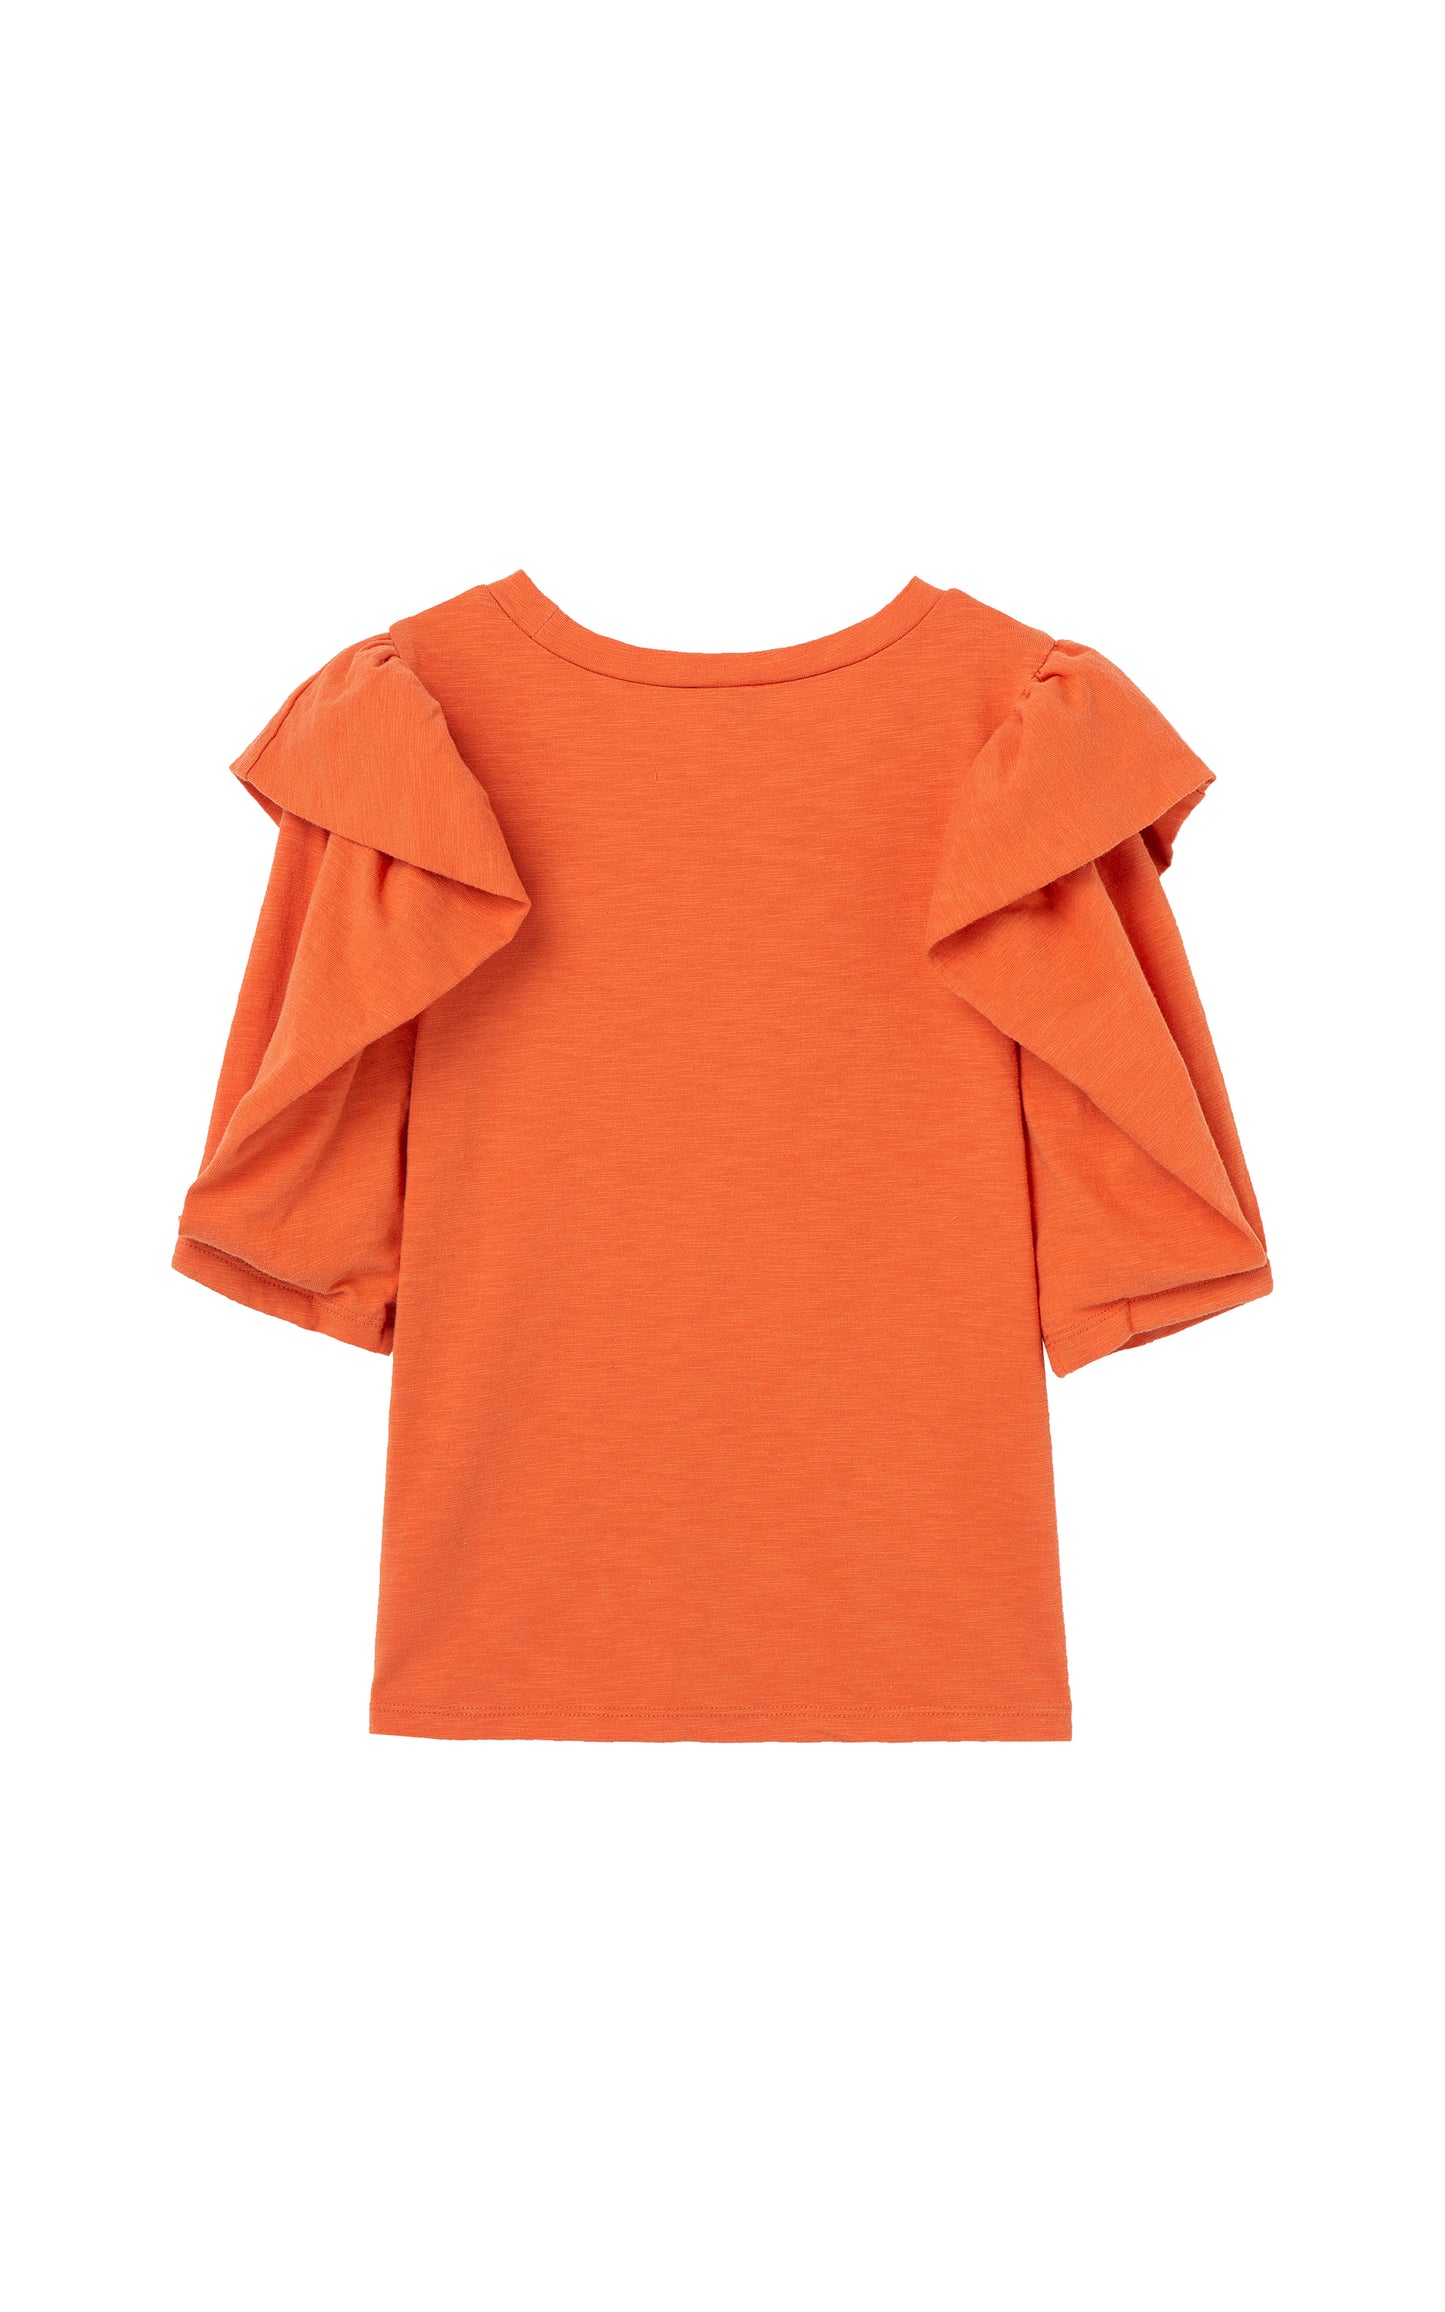 Back View Orange Top with Large sleeve ruffle 